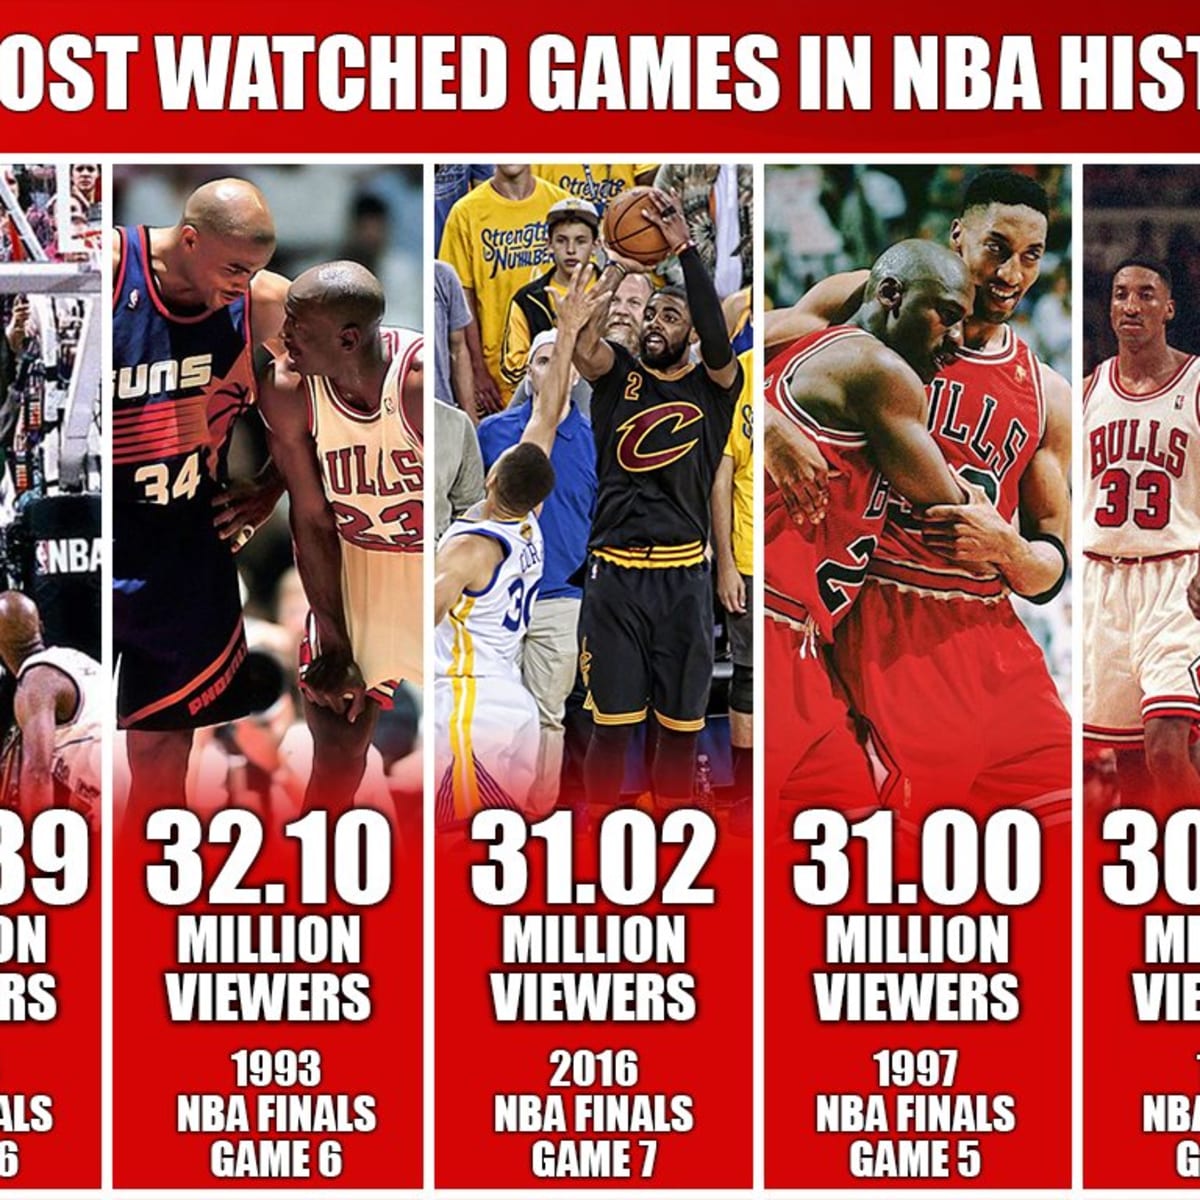 Top 10 Most Watched NBA Games Of All Time